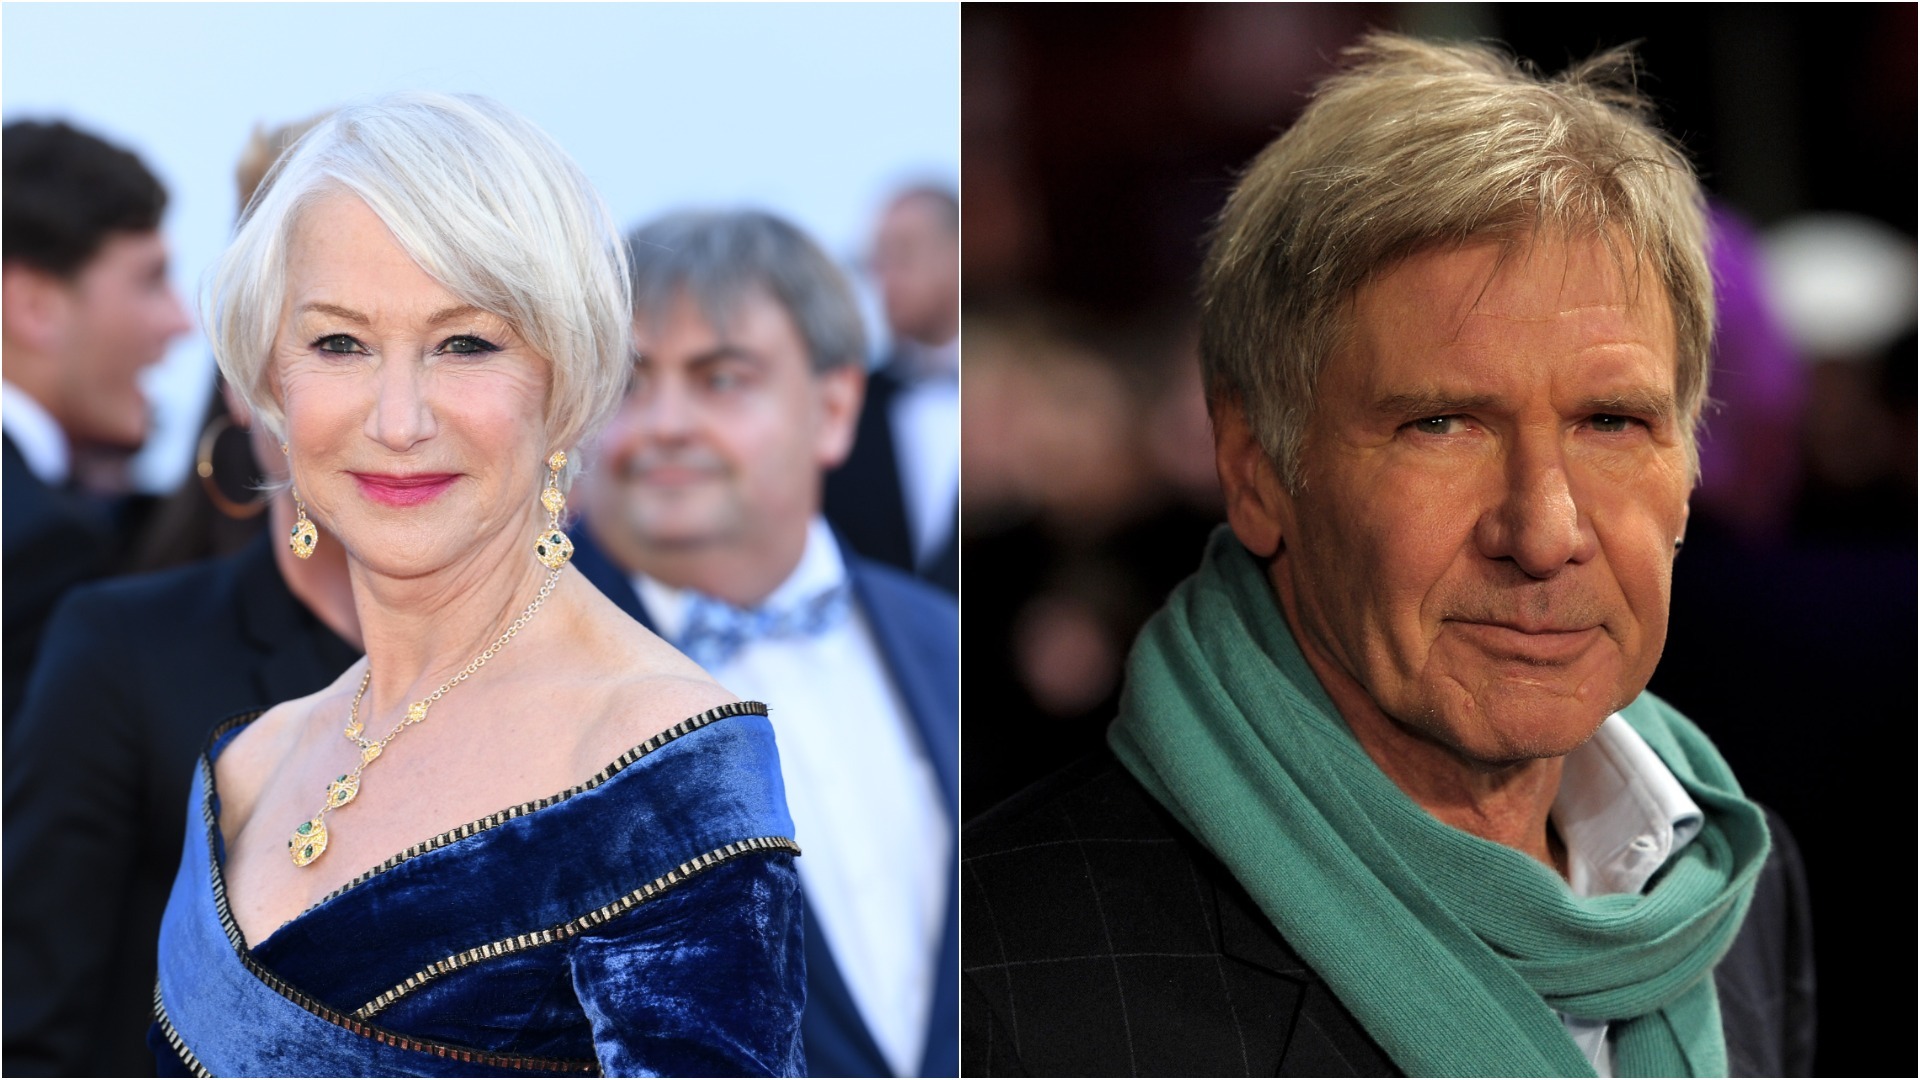 Harrison Ford and Helen Mirren join Yellowstone prequel